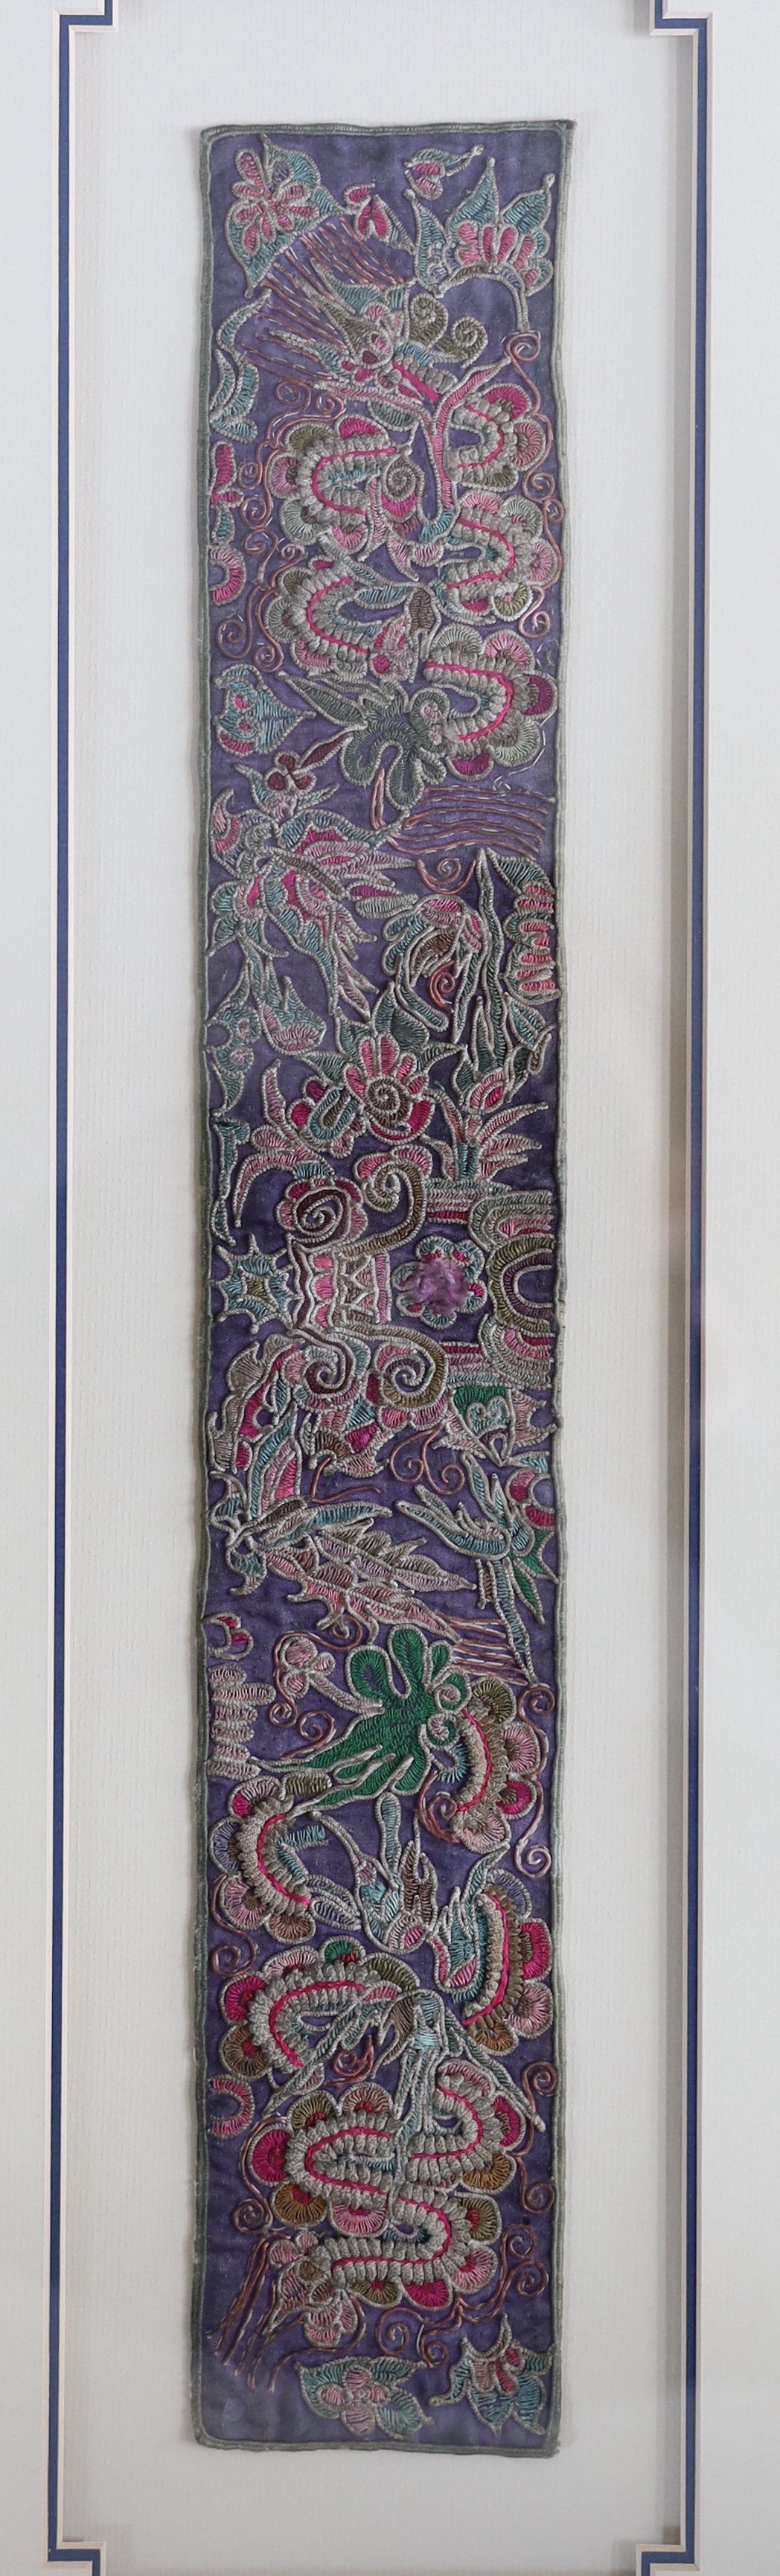 Two 19th century Chinese sleeve bands, embroidered in rich polychromes silks, designed with unusual fine appliqué embroidery, giving the panels a three dimensional effect, largest: 8cm wide, 50cm long